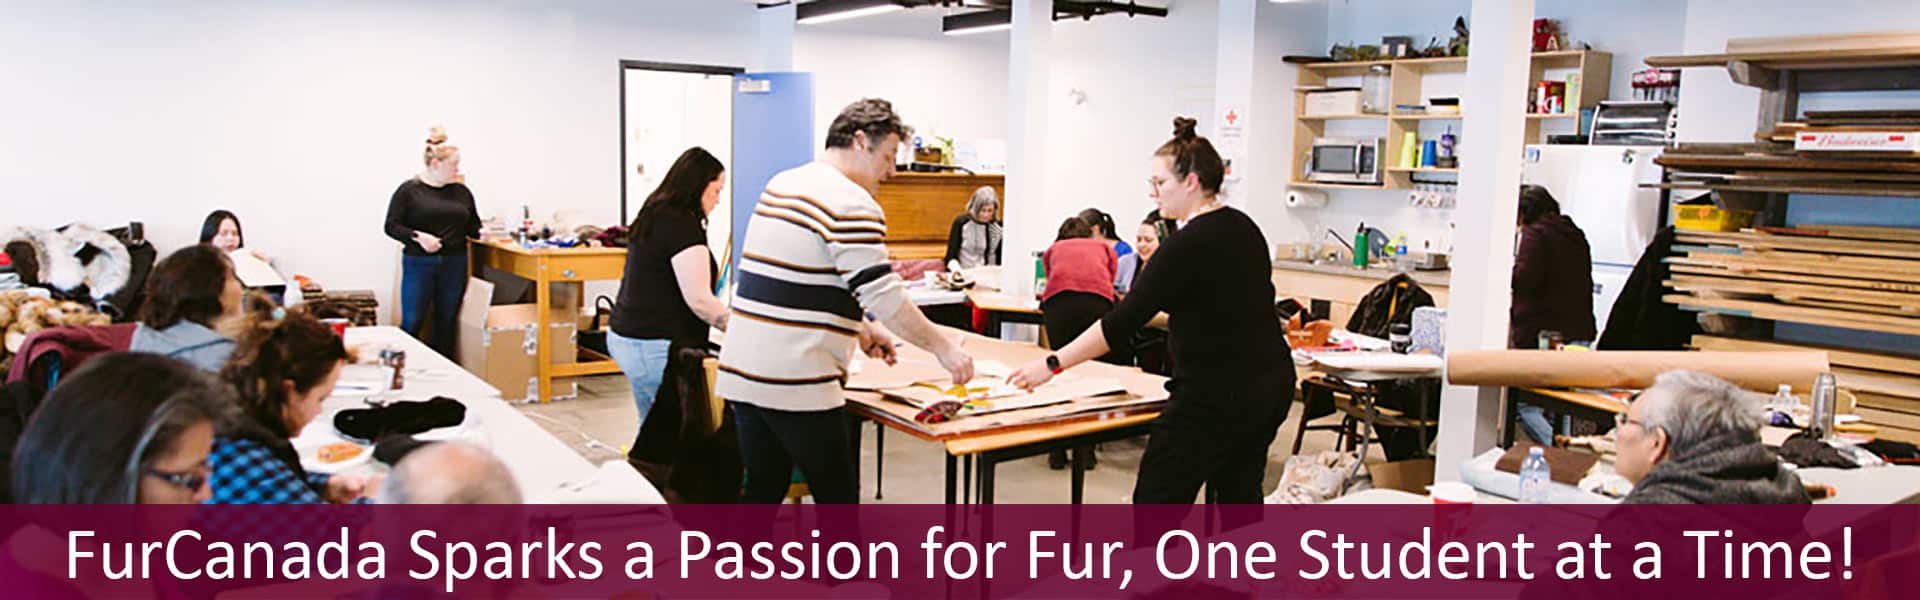 FurCanada Sparks a Passion for Fur, One Student at a Time!